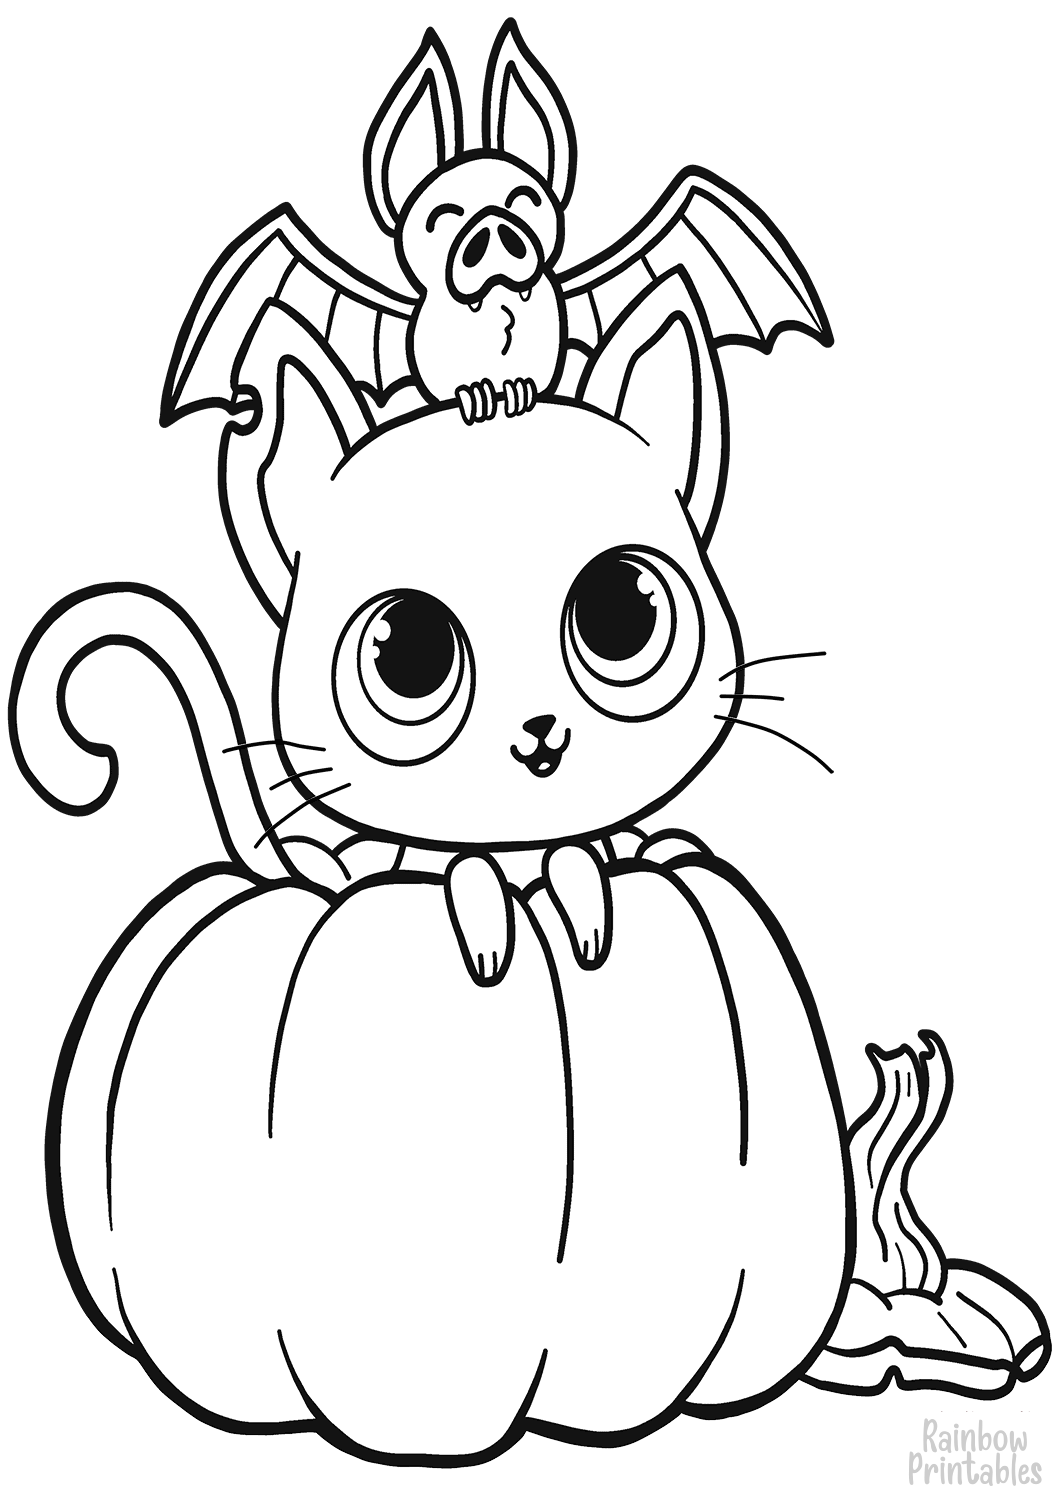 Cute Cat and Bat with Pumpkin Halloween Line Art Drawing Set Free Activity Coloring Pages for Kids-02